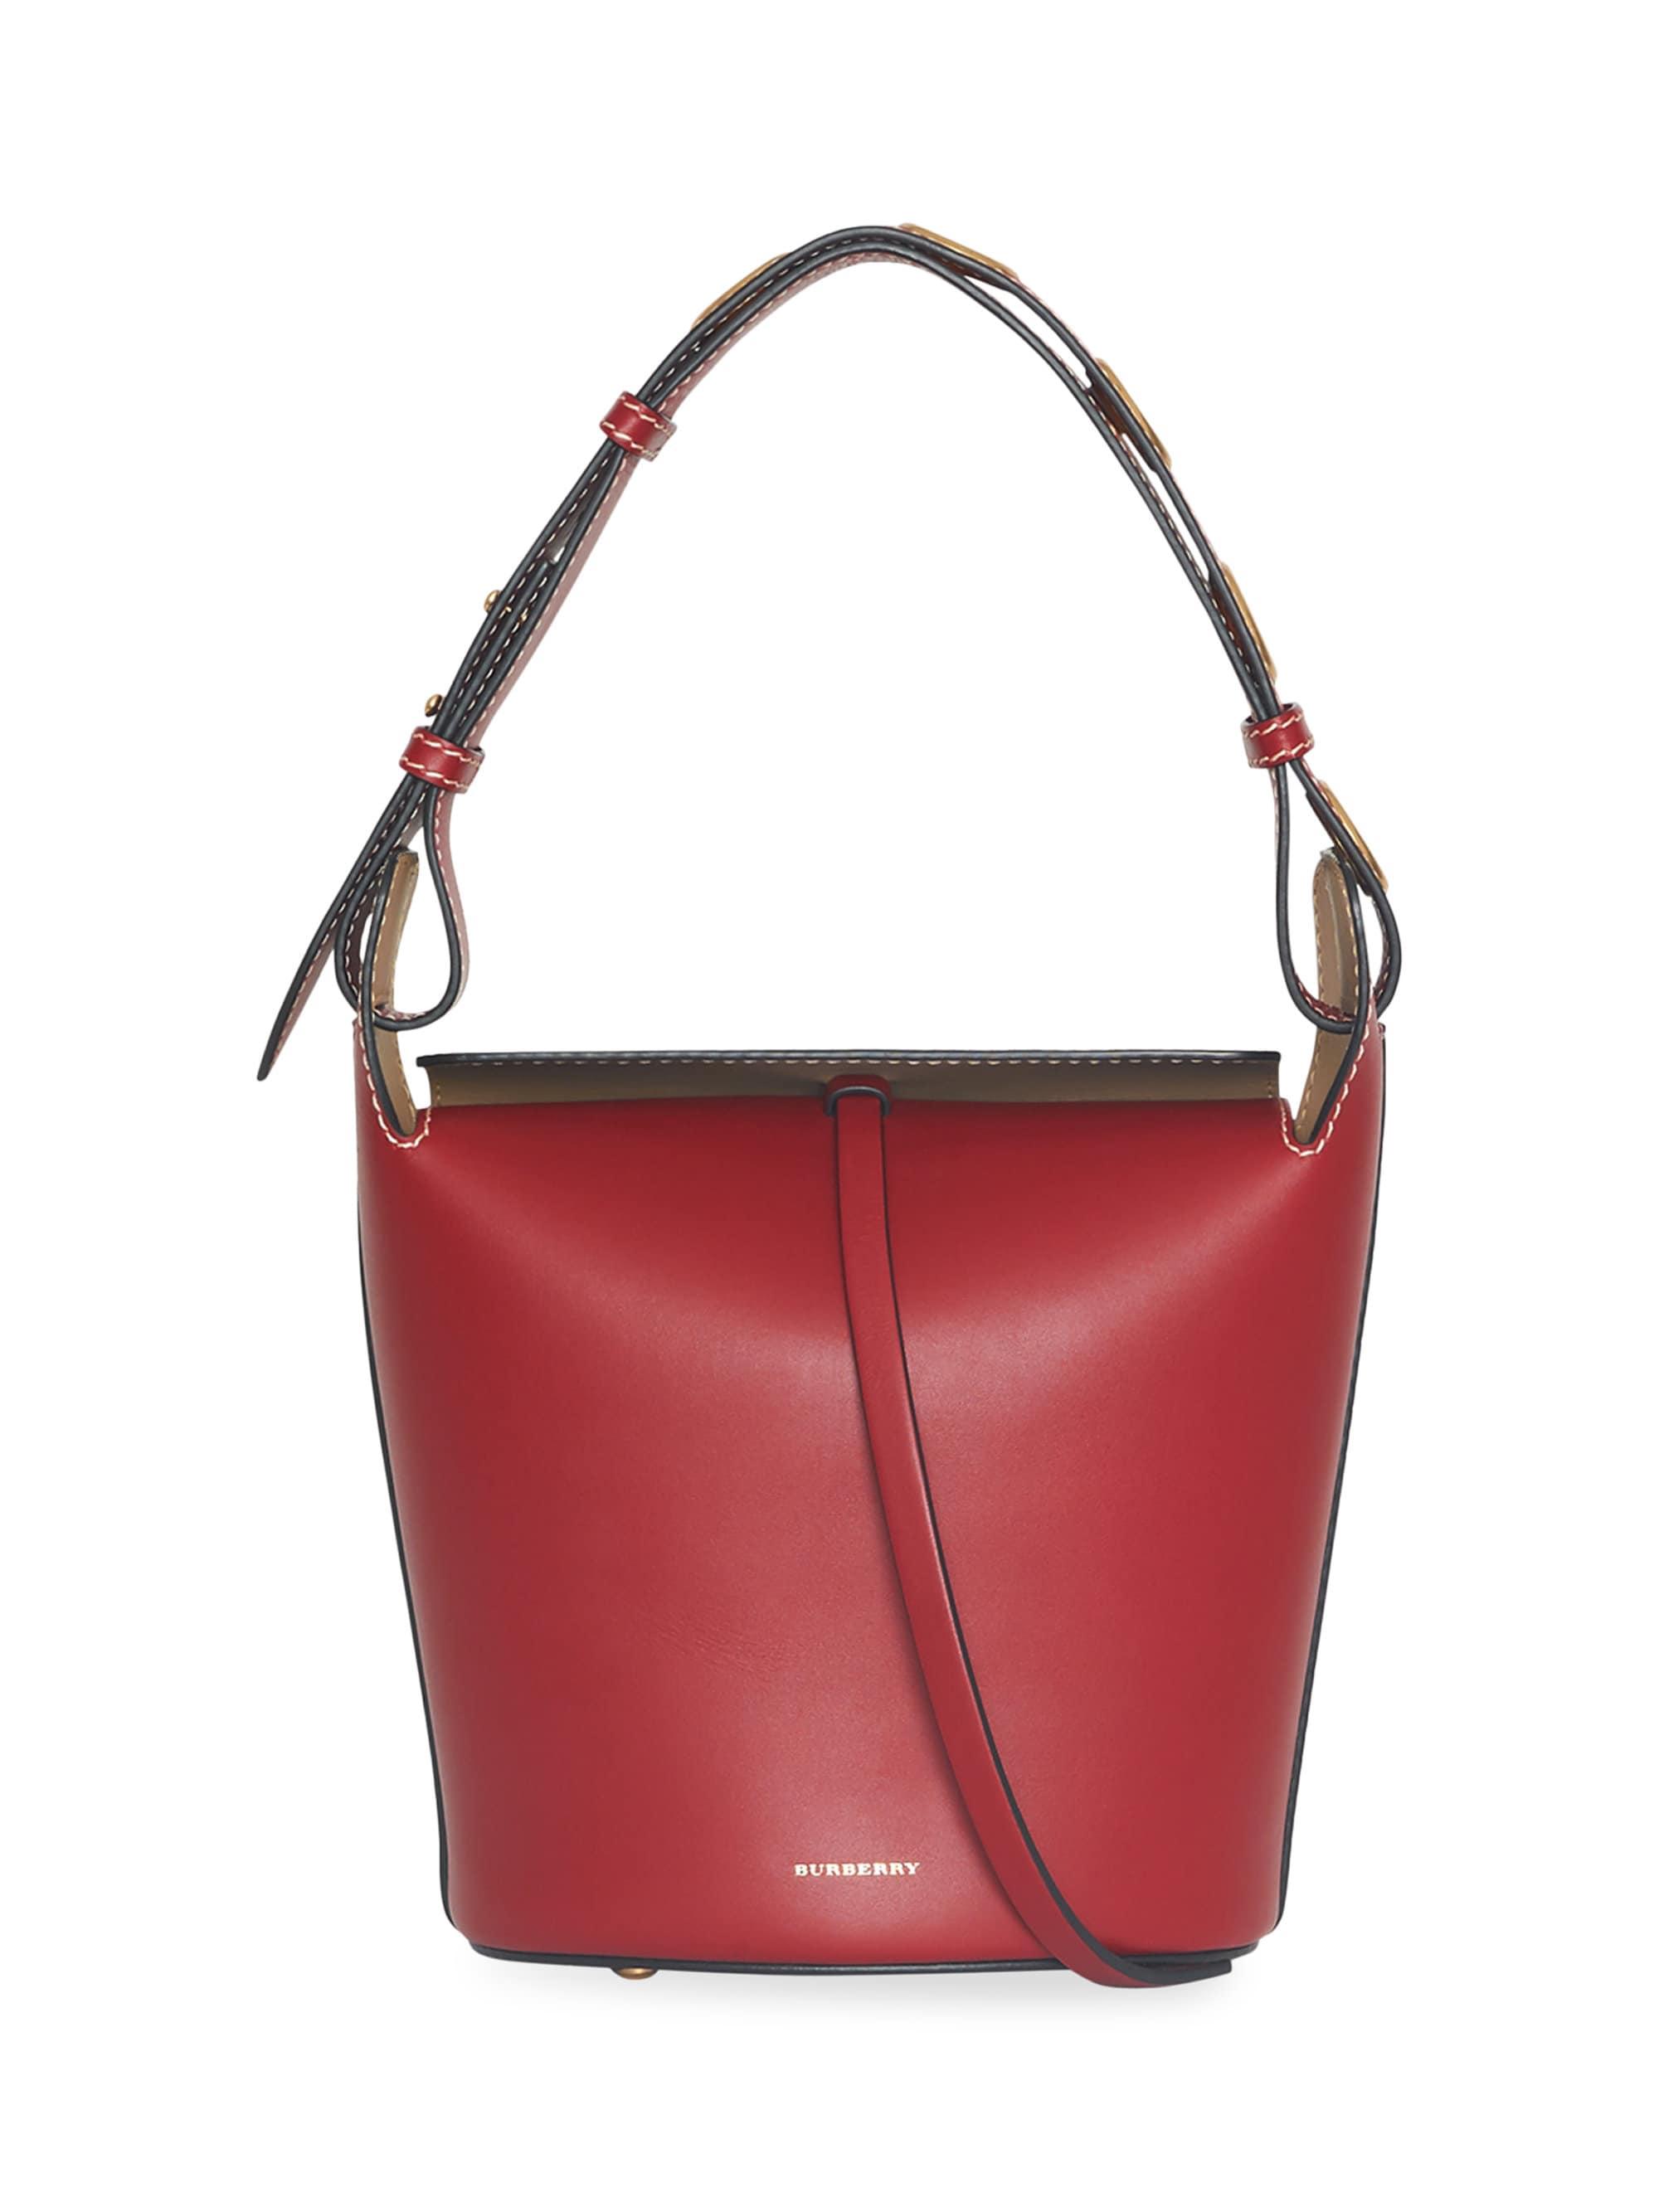 Burberry Small Leather Bucket Bag in Red - Lyst